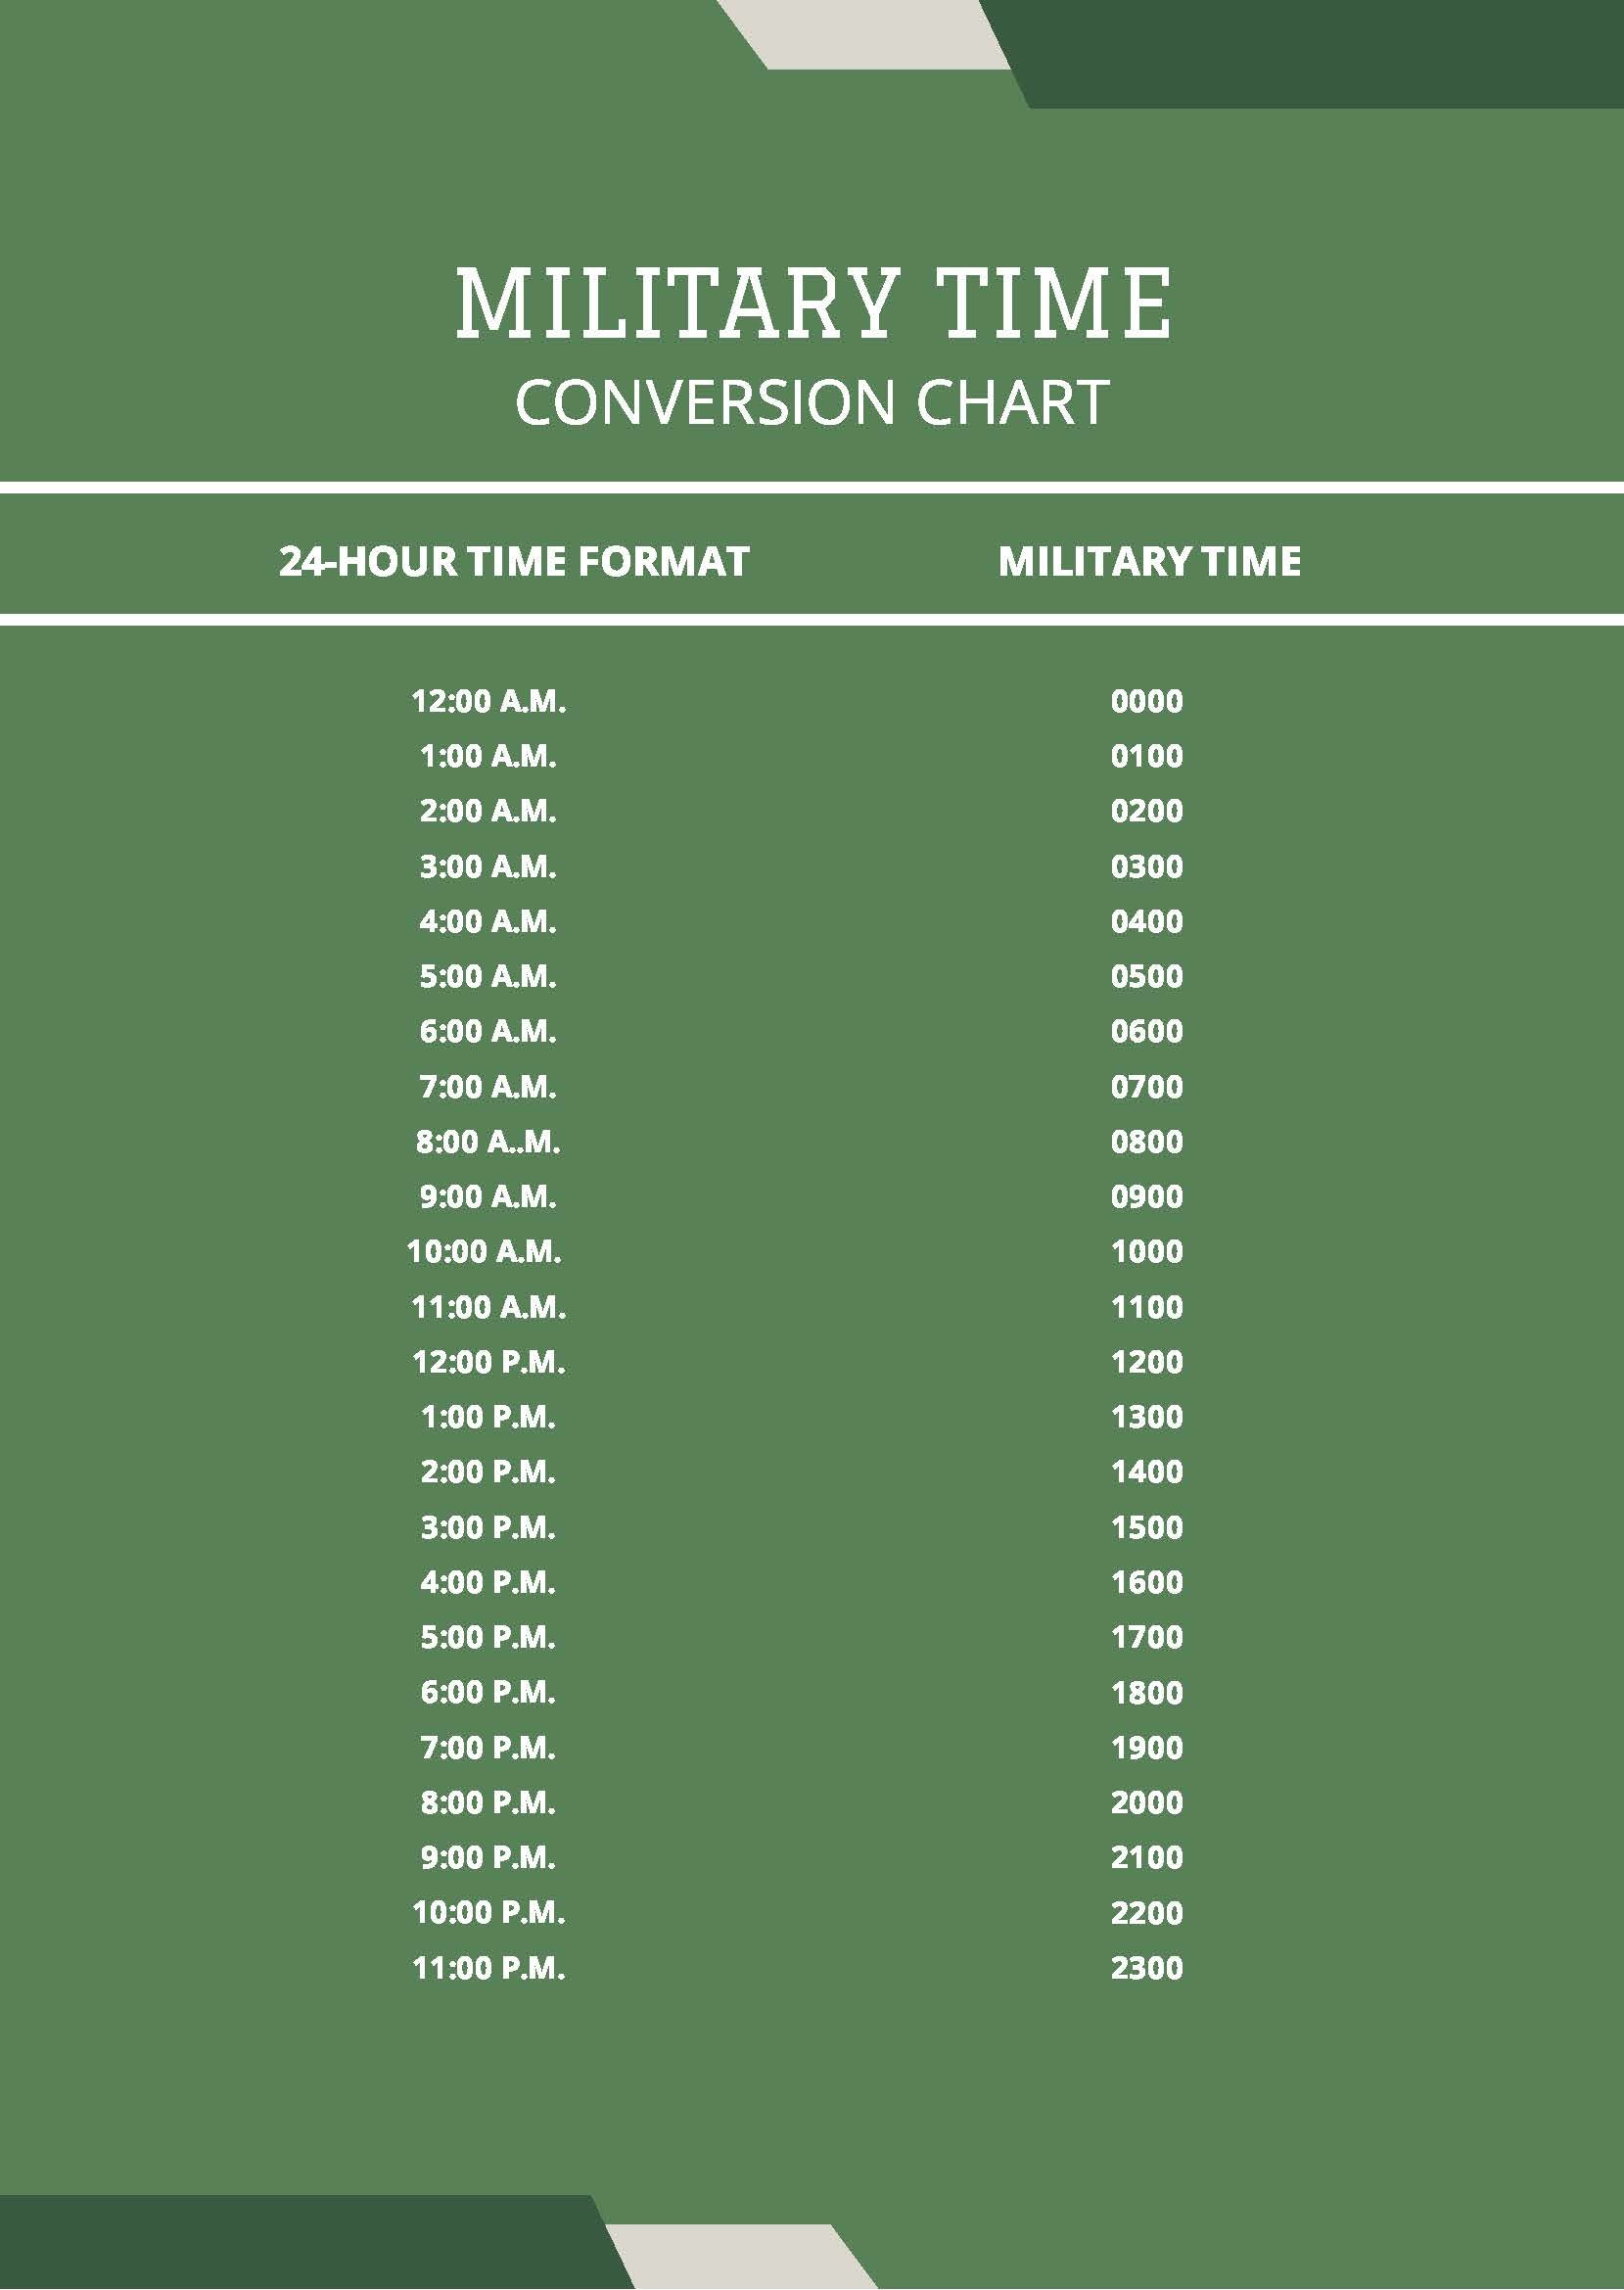 Military Time Conversion Chart